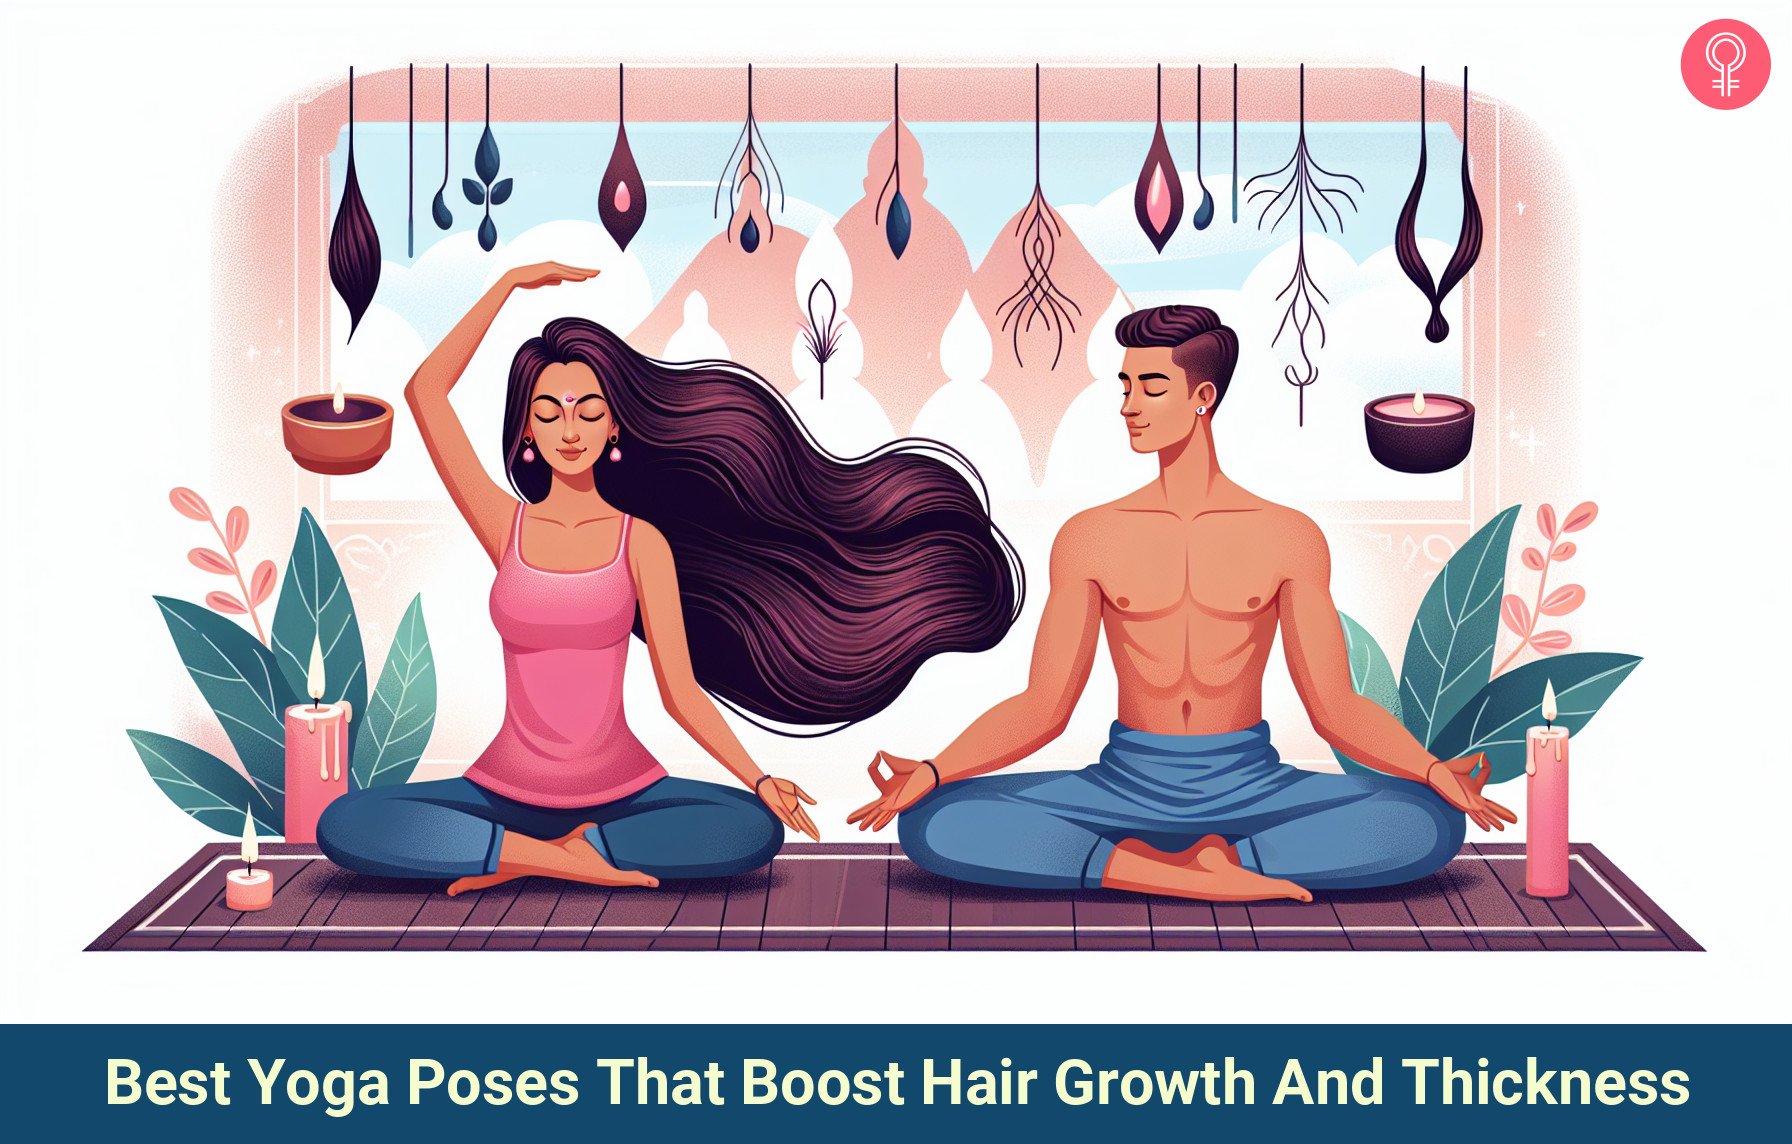 7 Best Yoga Poses That Boost Hair Growth And Thickness